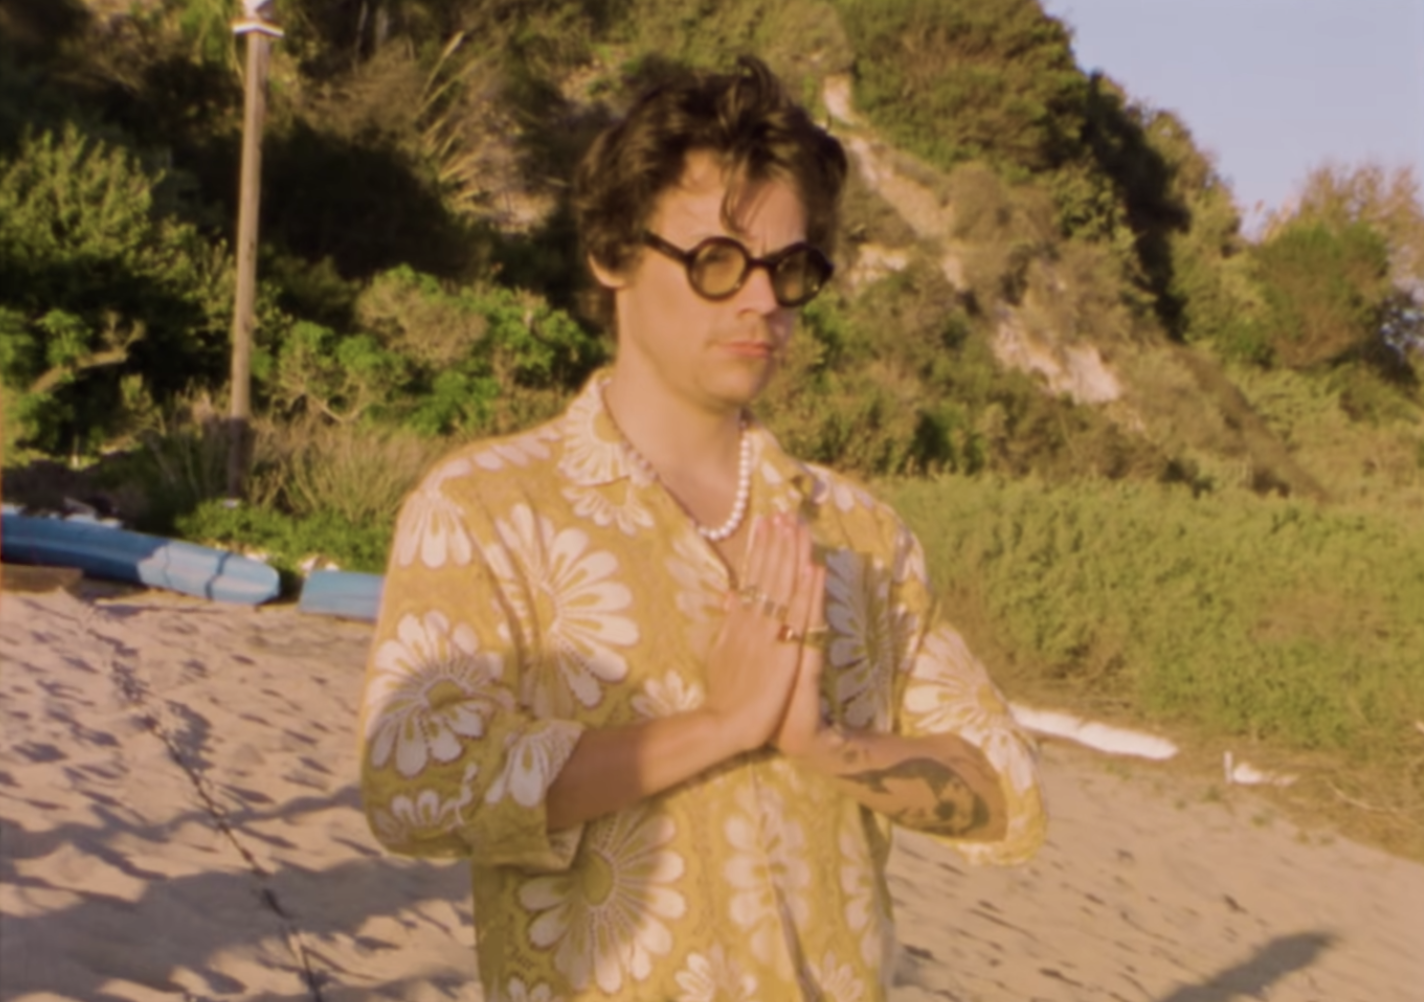 Harry meditating on the beach while clasping his hands in prayer